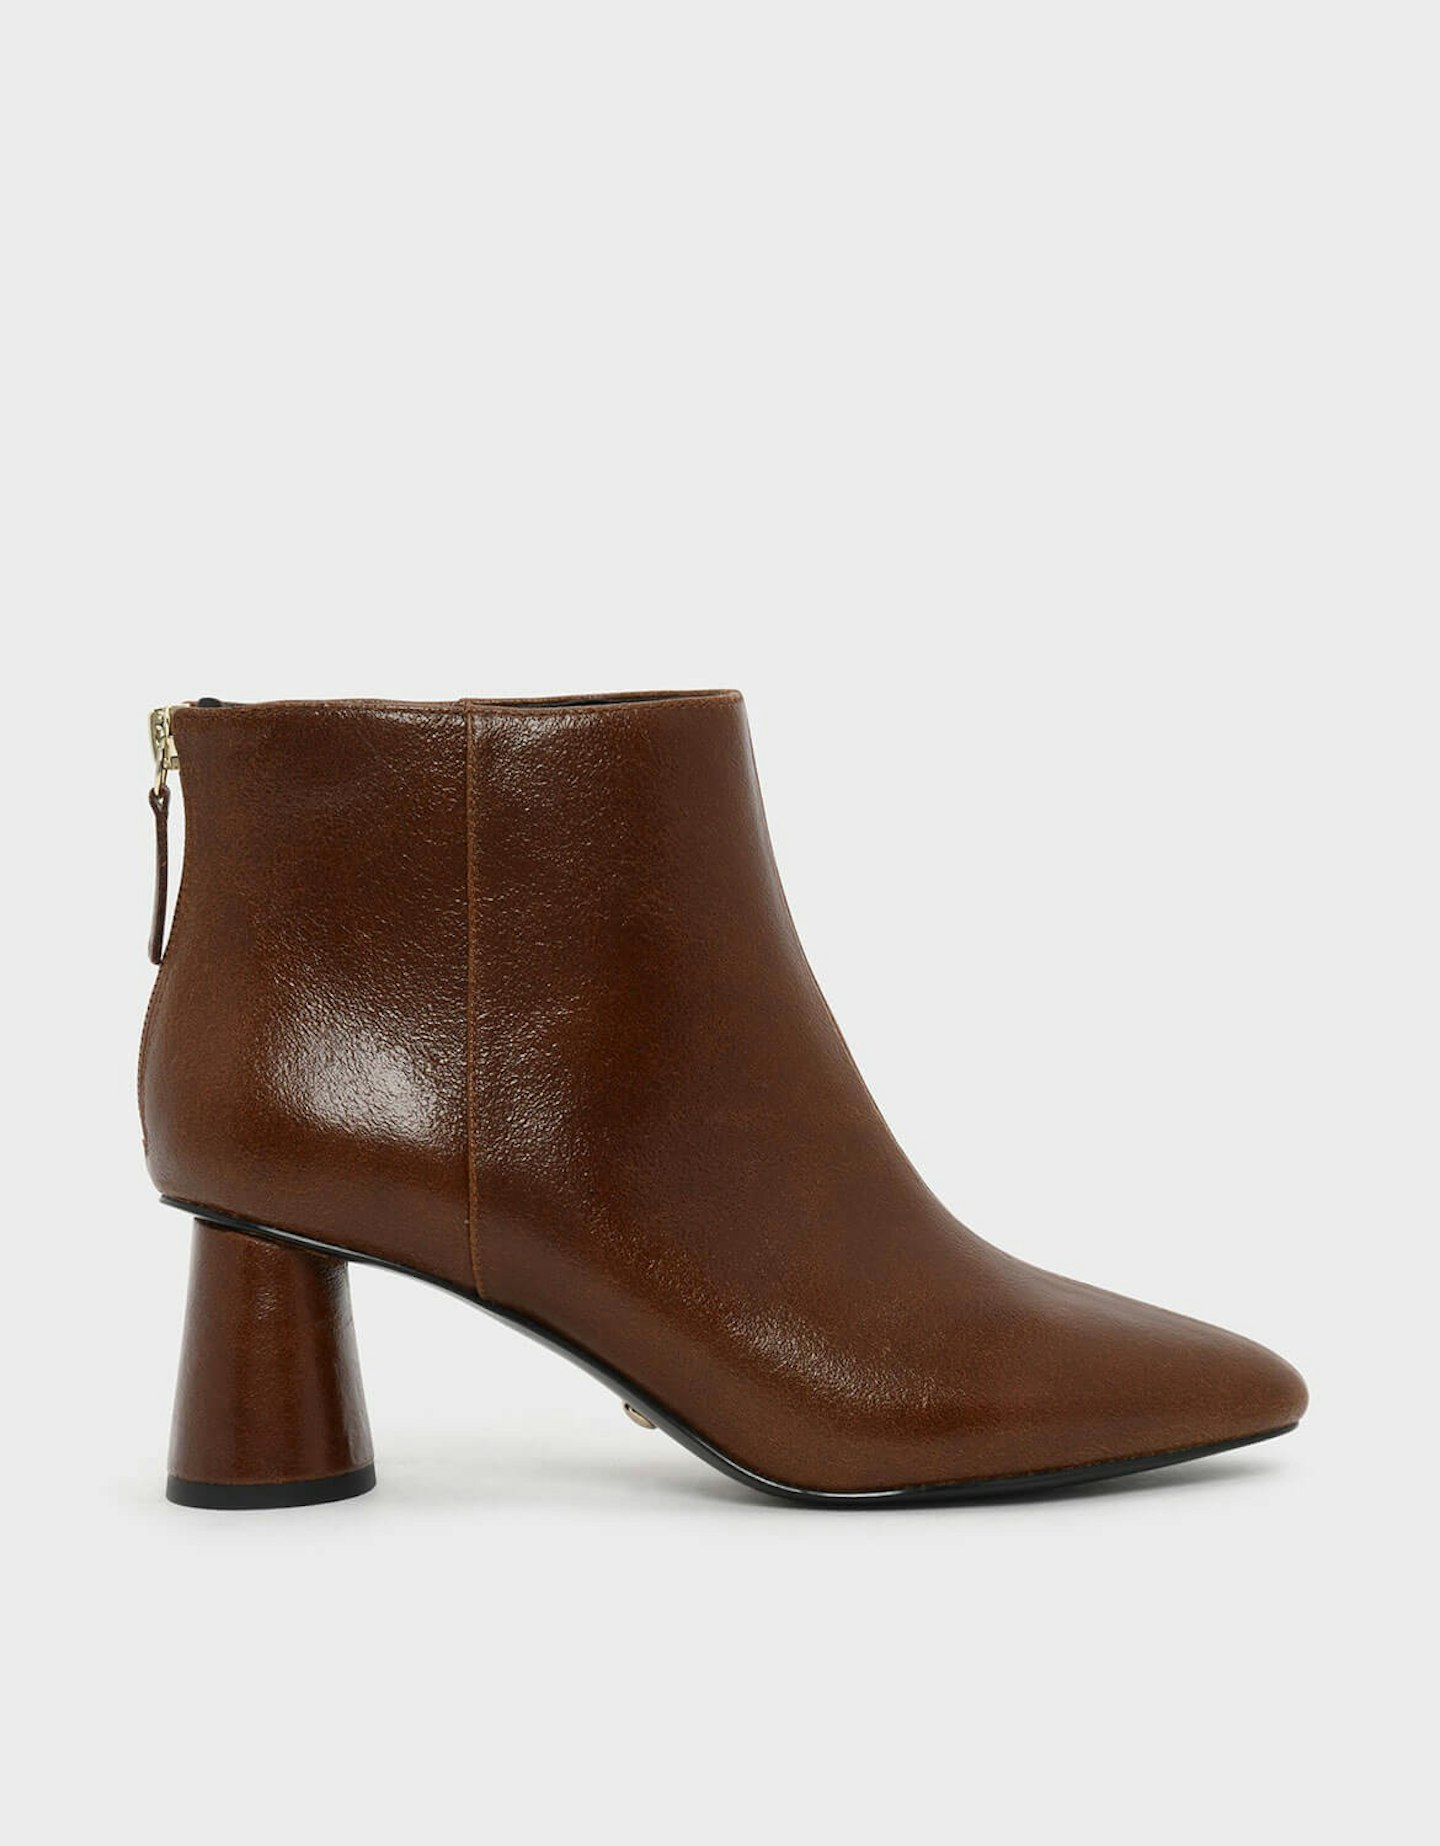 Charles & Keith, Oval Block Heel Leather Boots, £99